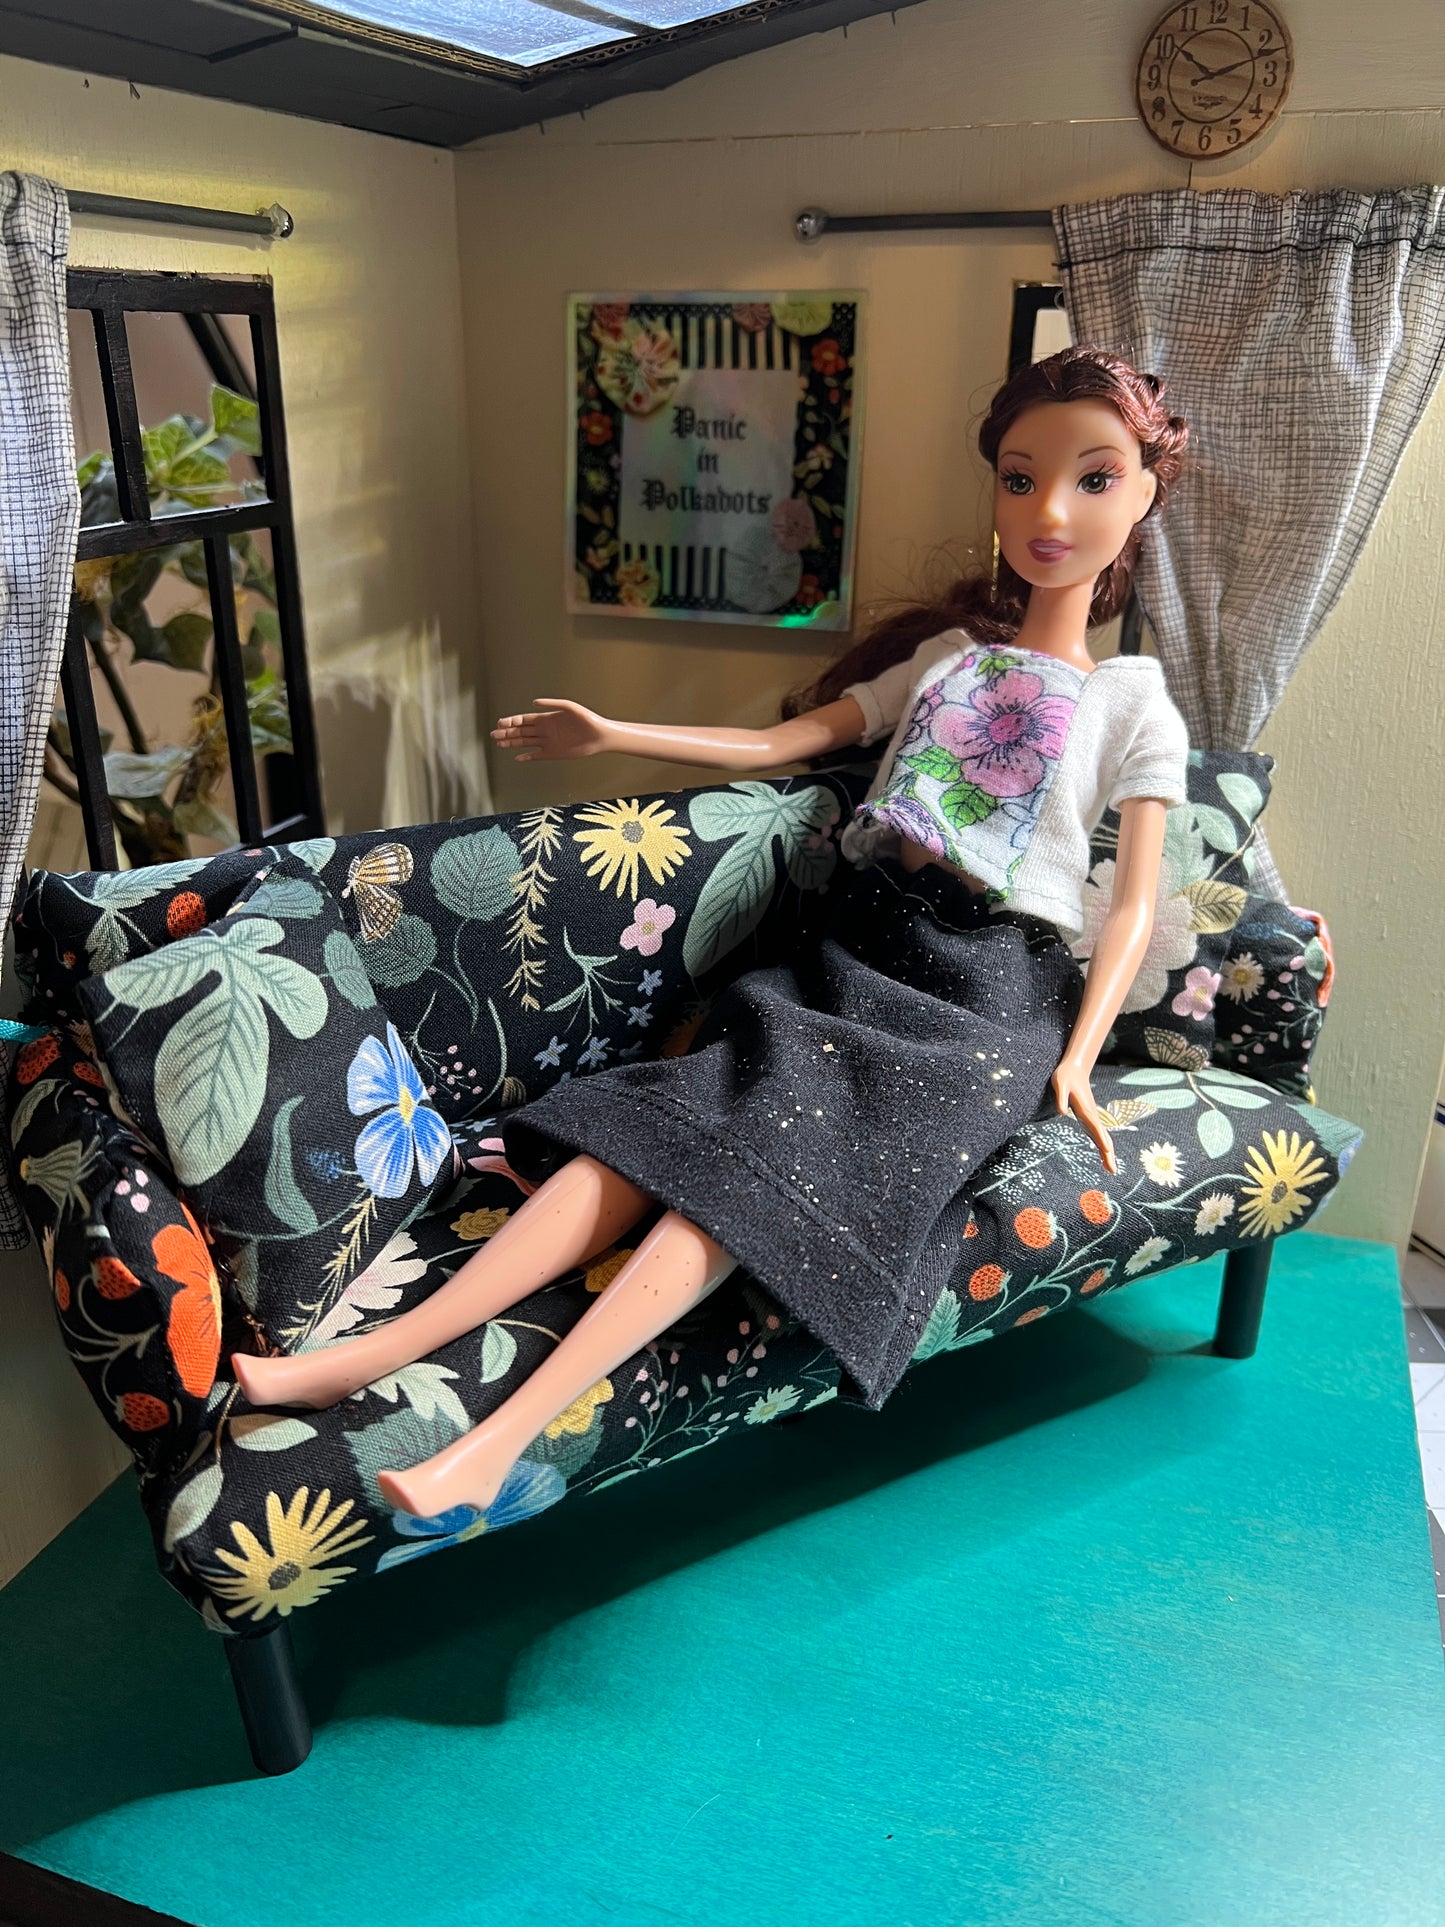 a Barbie doll sits across a miniature couch, with colorful flowers, in a 1:6 scale roombox